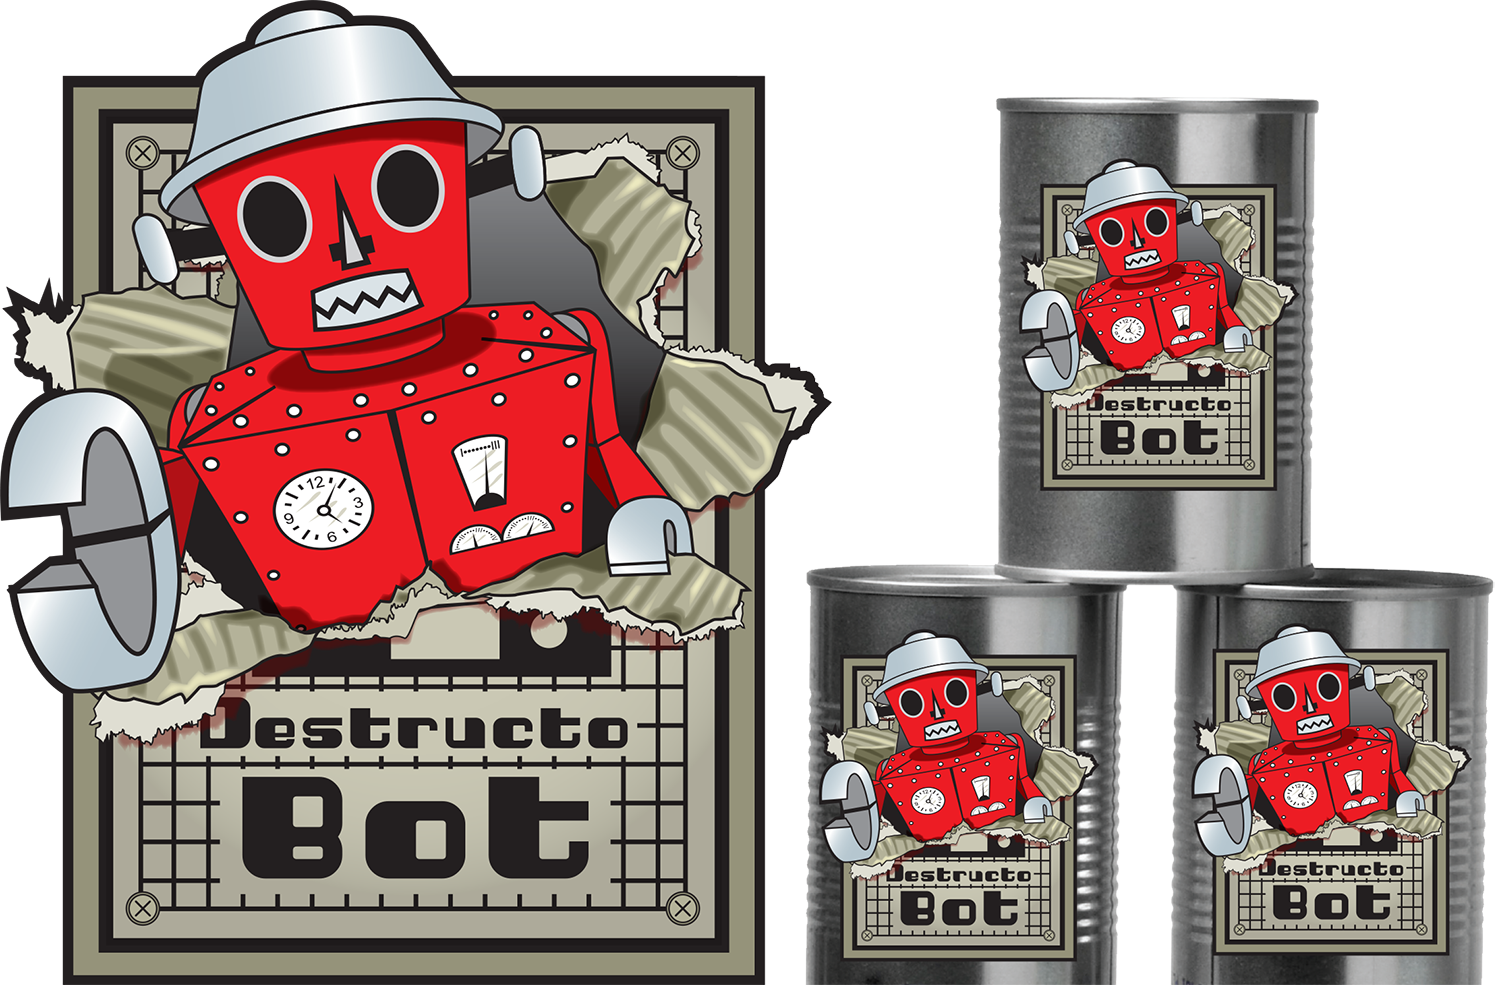 Twin Cities packaging design and illustration - Destructo Bot Vintage tin robot toy package redesign, tin can packaging with paper label